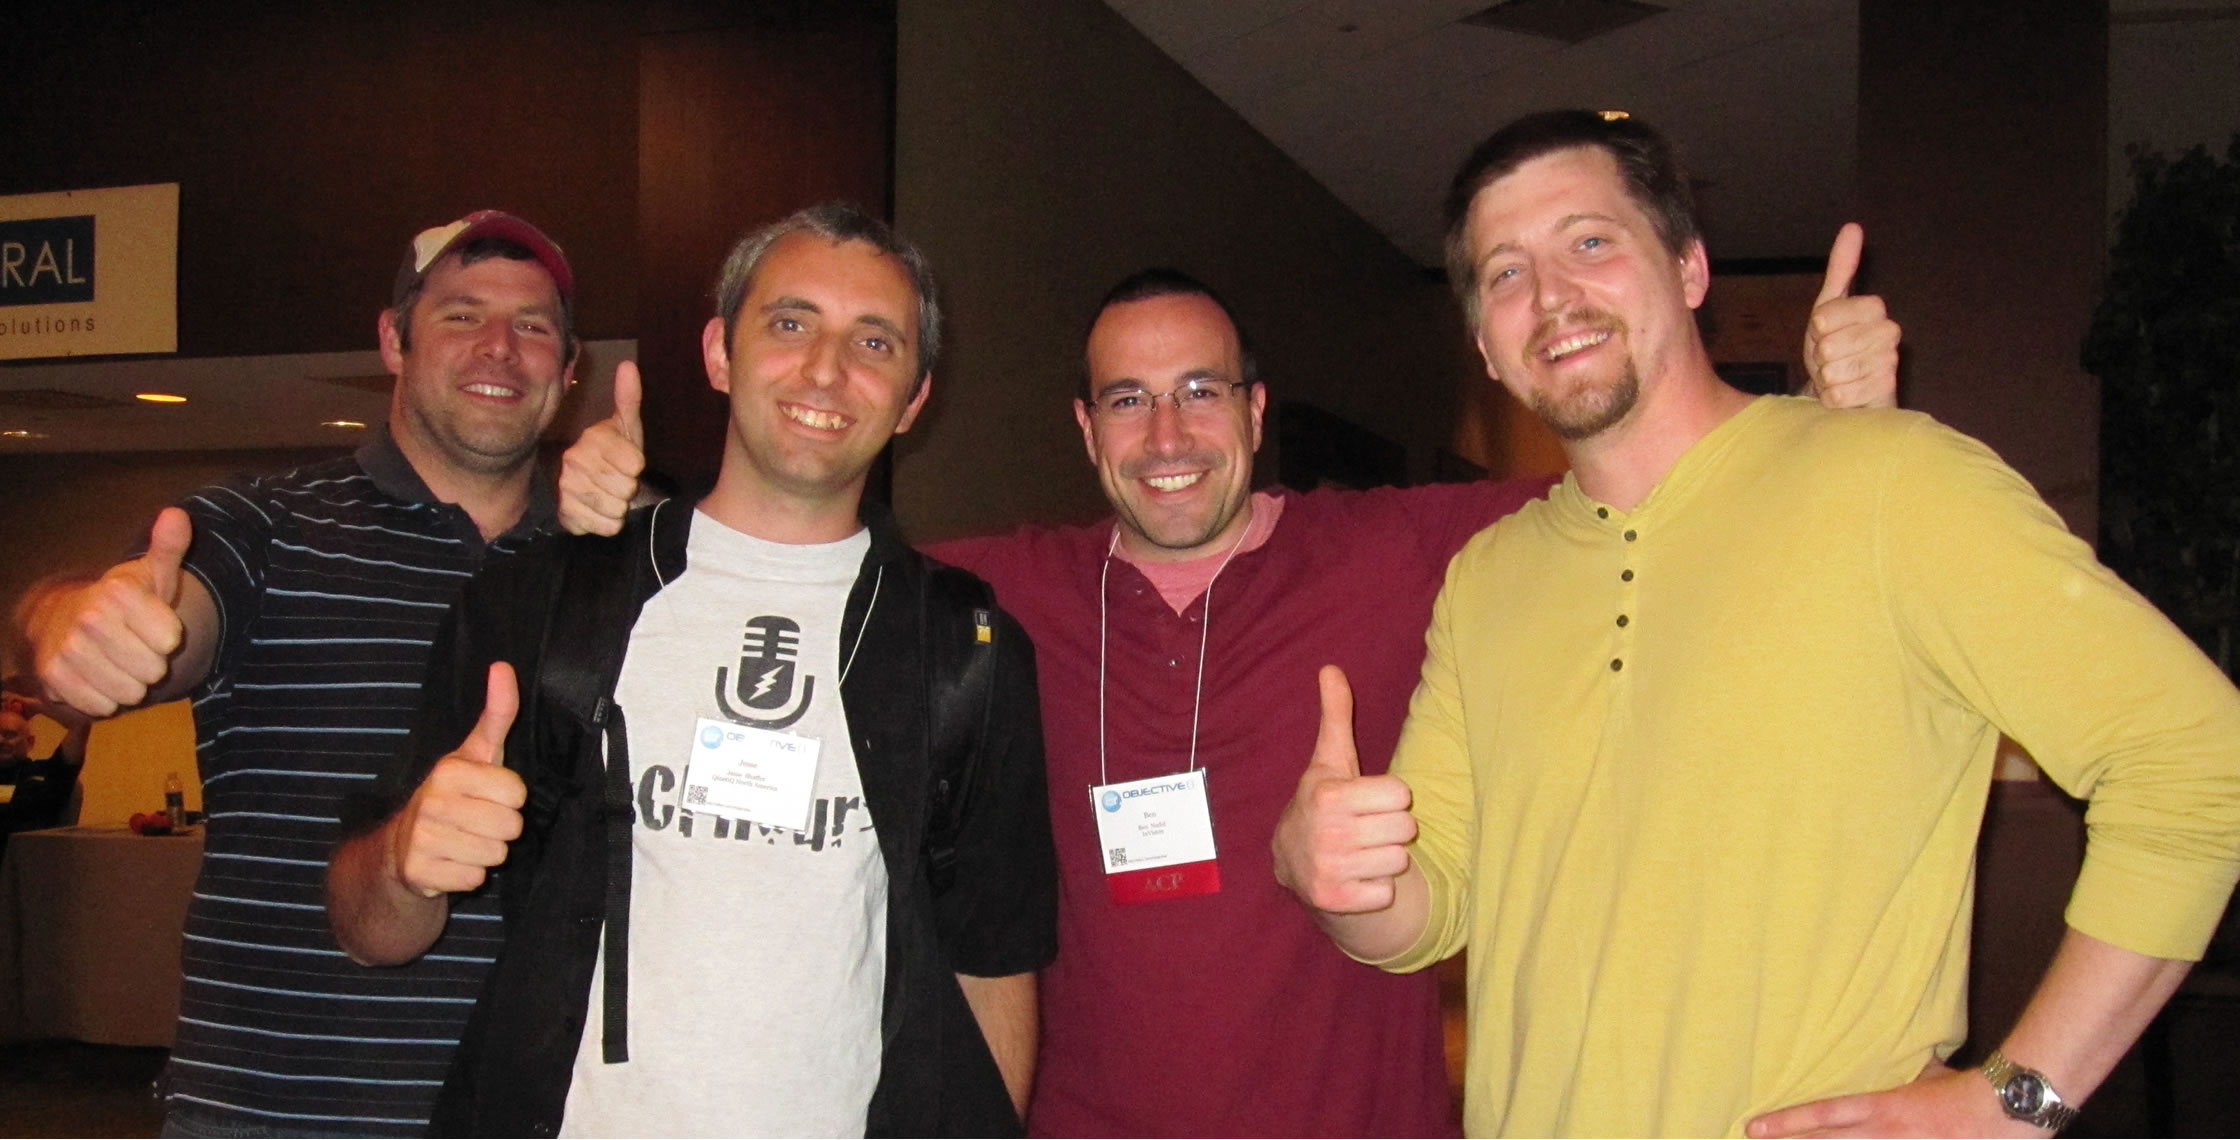 Ben Nadel at cf.Objective() 2012 (Minneapolis, MN) with: Erik Meier, Jesse Shaffer, and Bob Gray